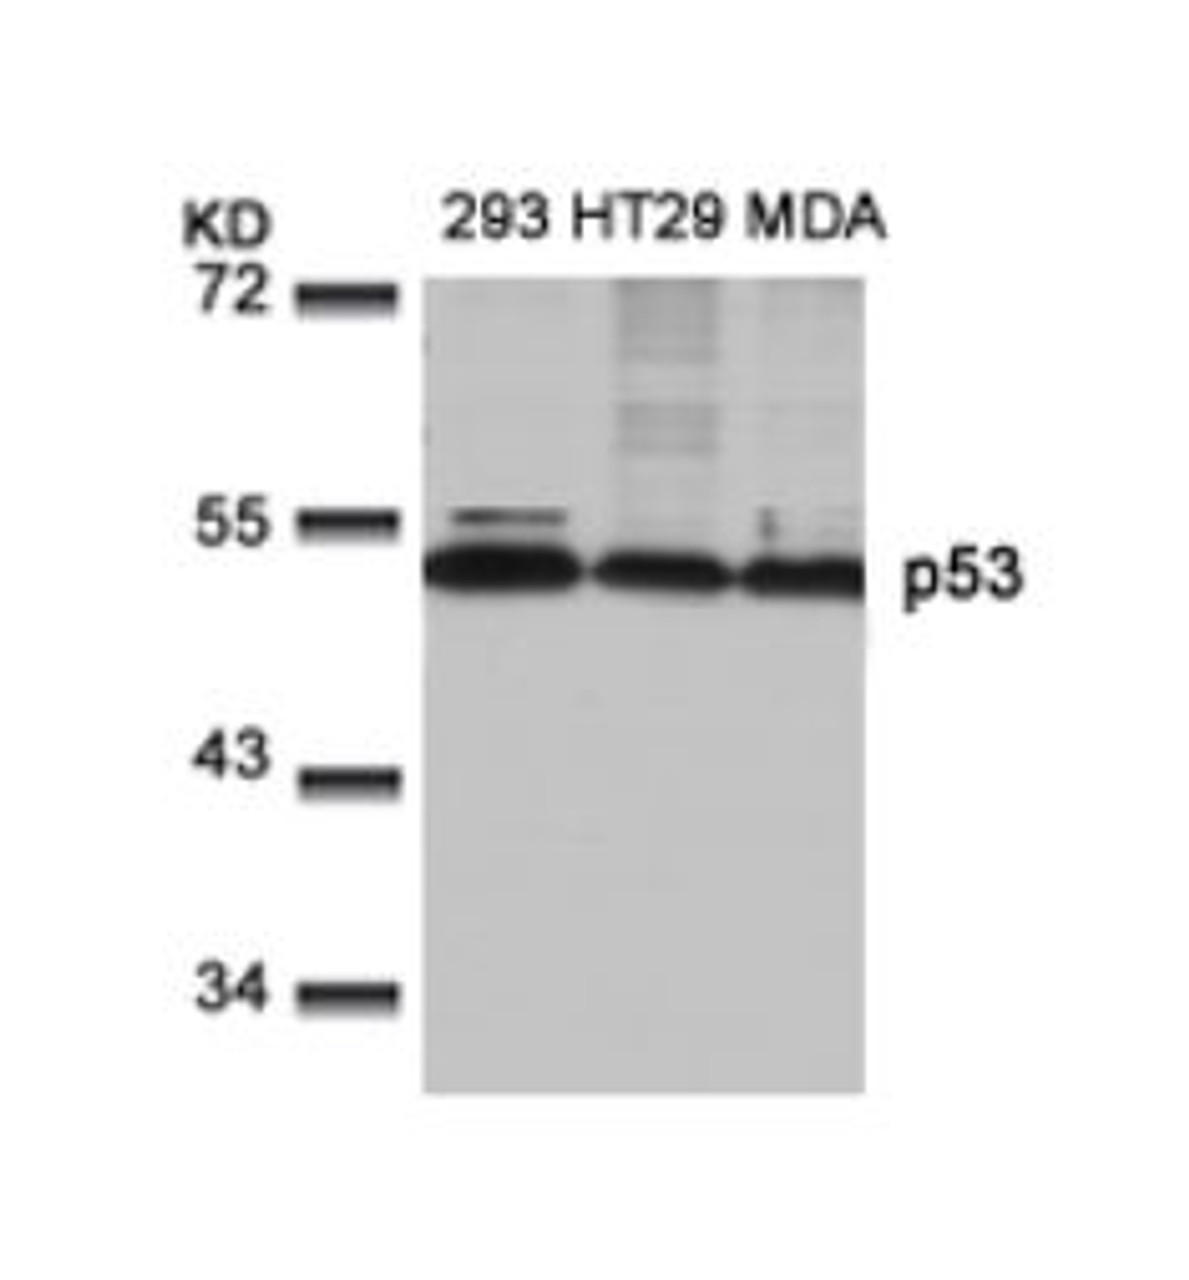 Western blot analysis of lysed extracts from 293, HT29 and MDA cells using p53 (Ab-9) .